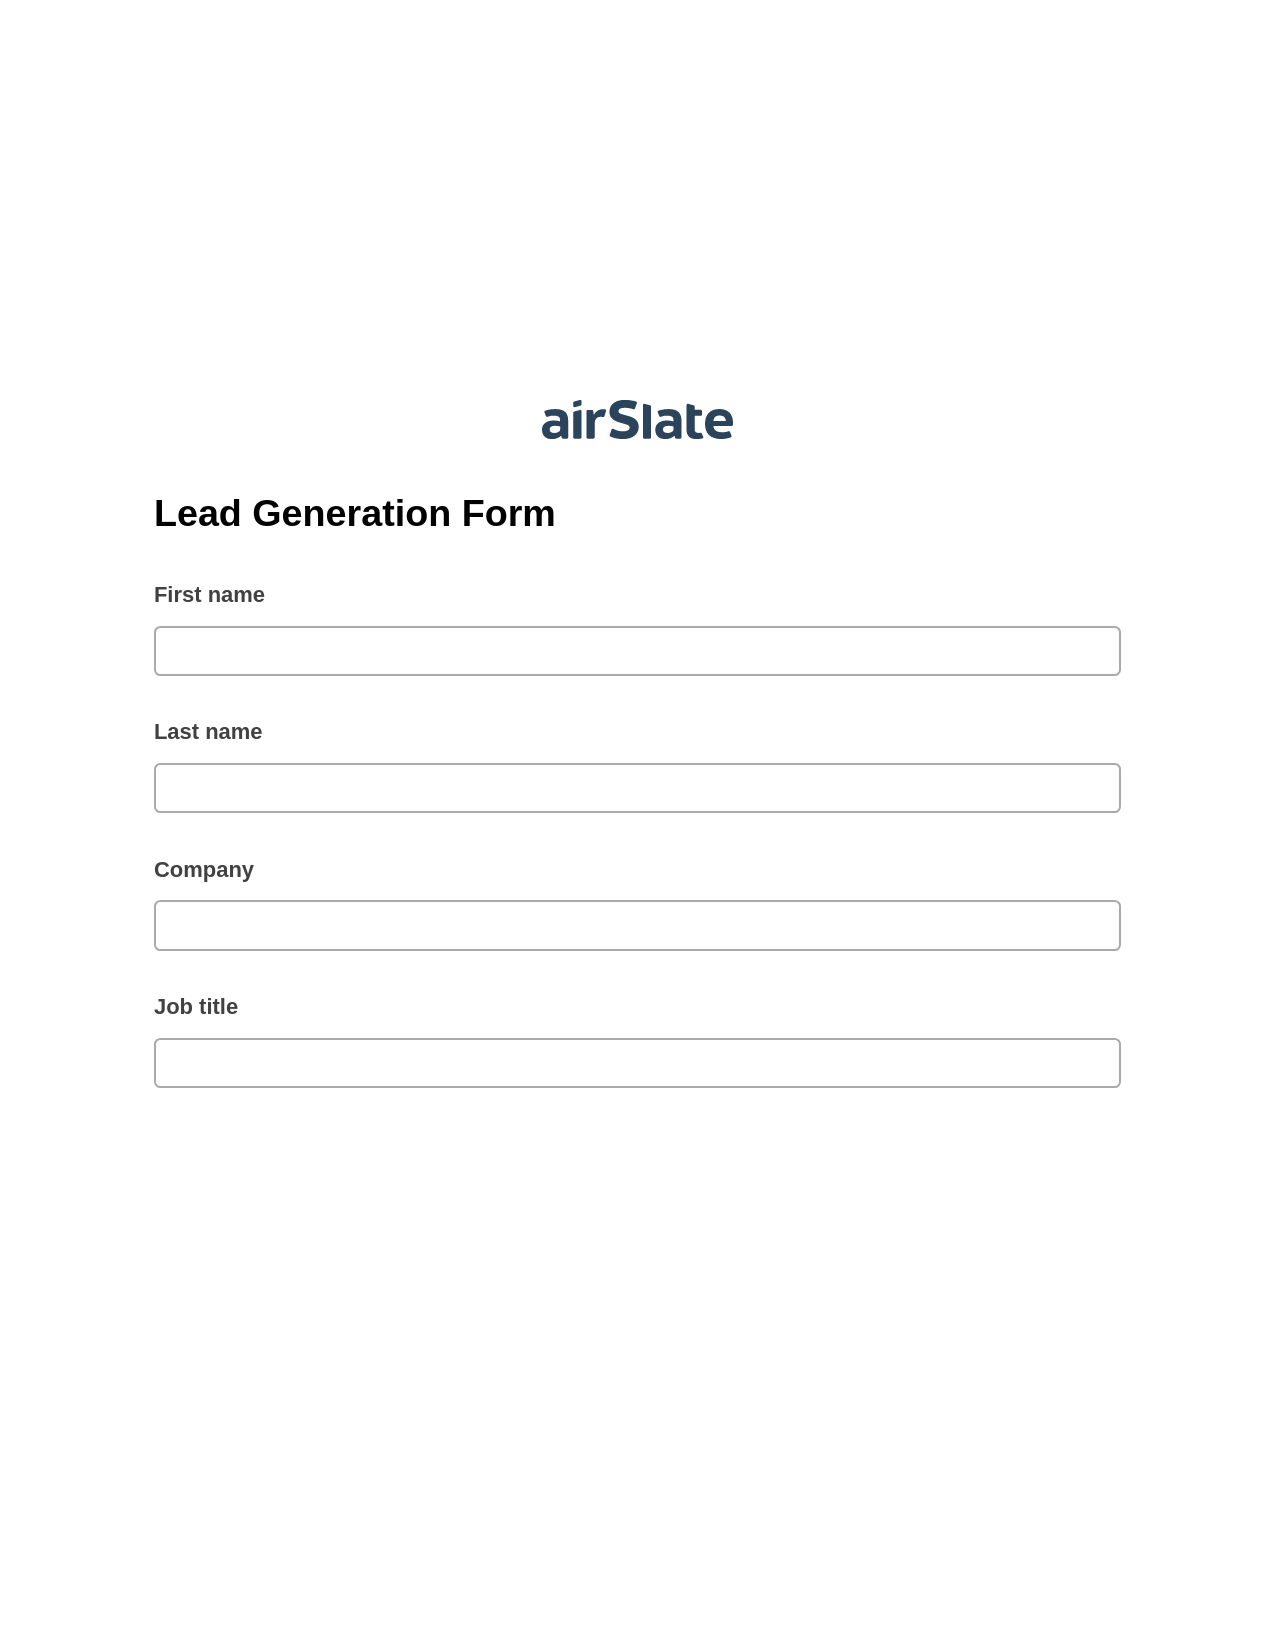 Lead Generation Form Pre-fill from CSV File Bot, Slack Notification Bot, Archive to Box Bot